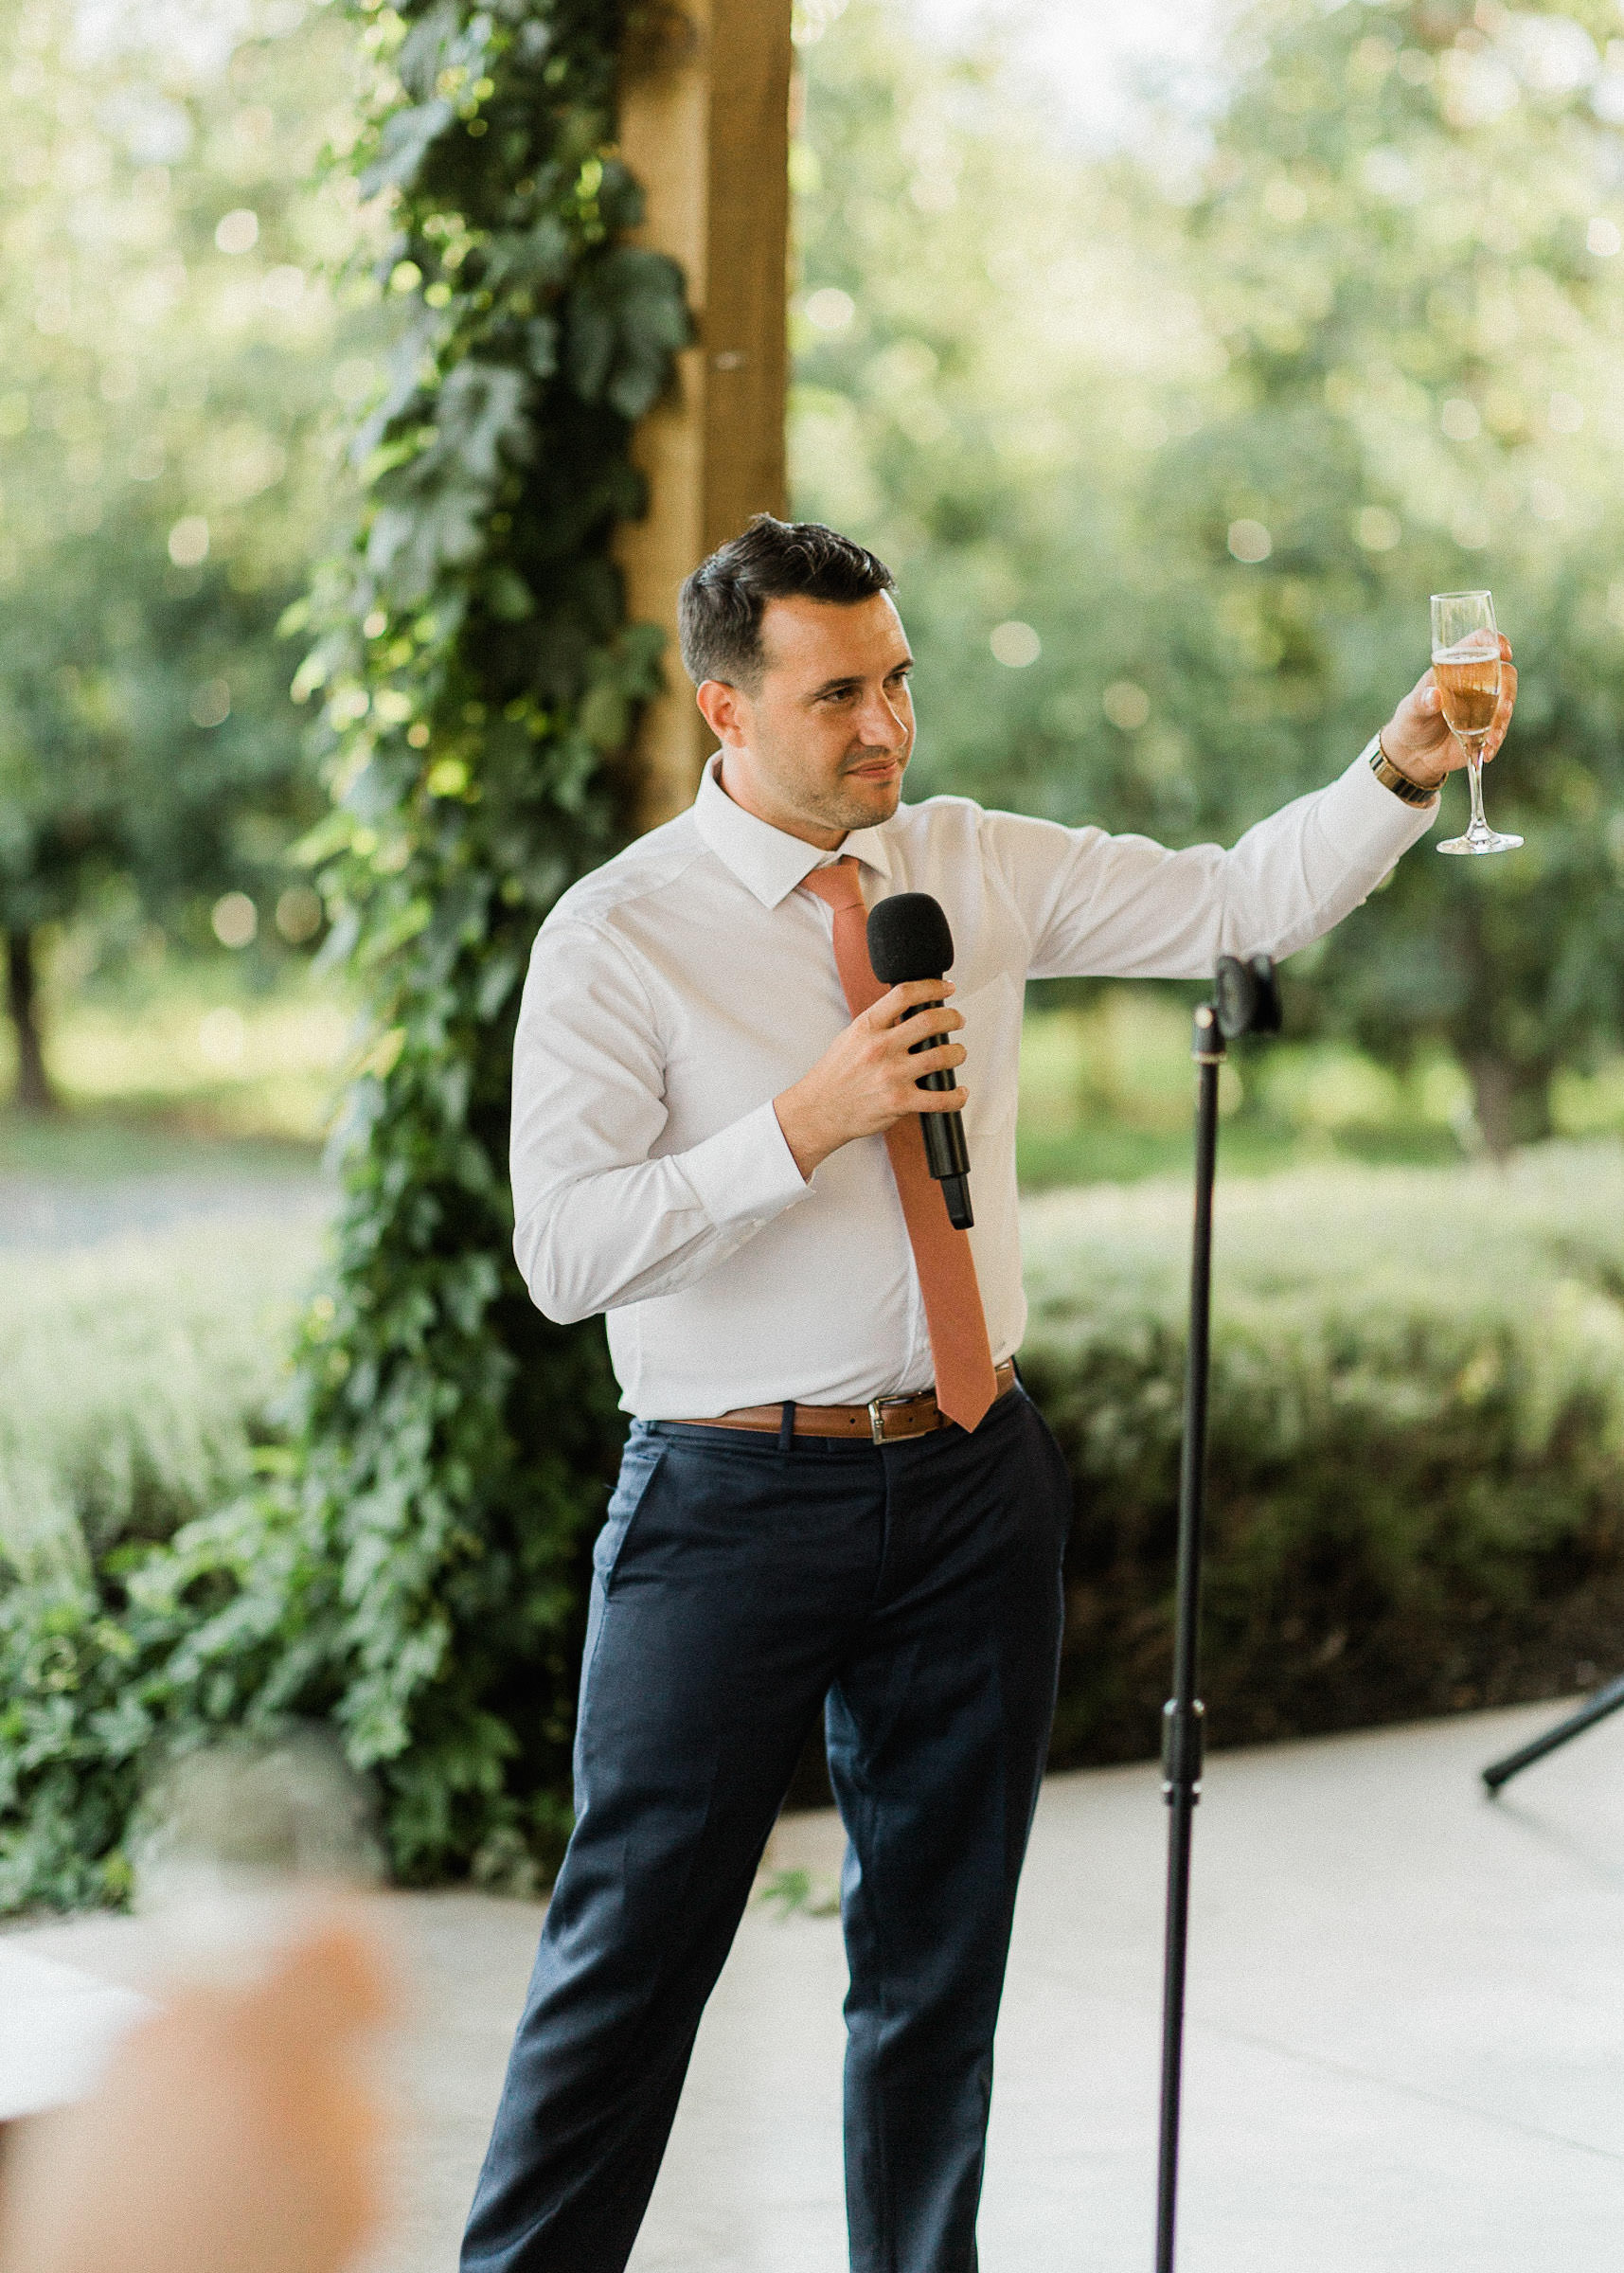 Best man raises a glass of champagne as he gives a toast